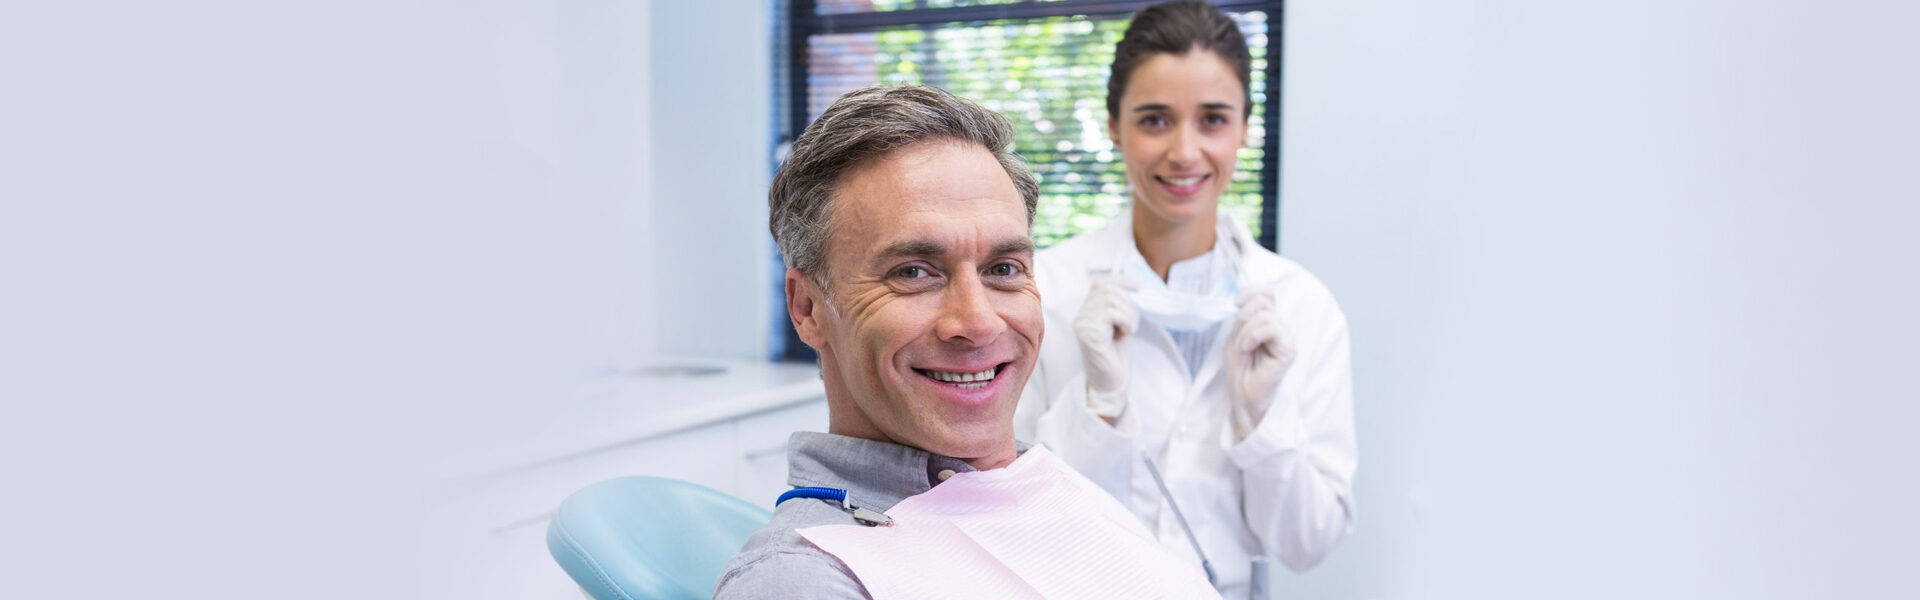 Dental Exams and Cleanings in Toronto, ON